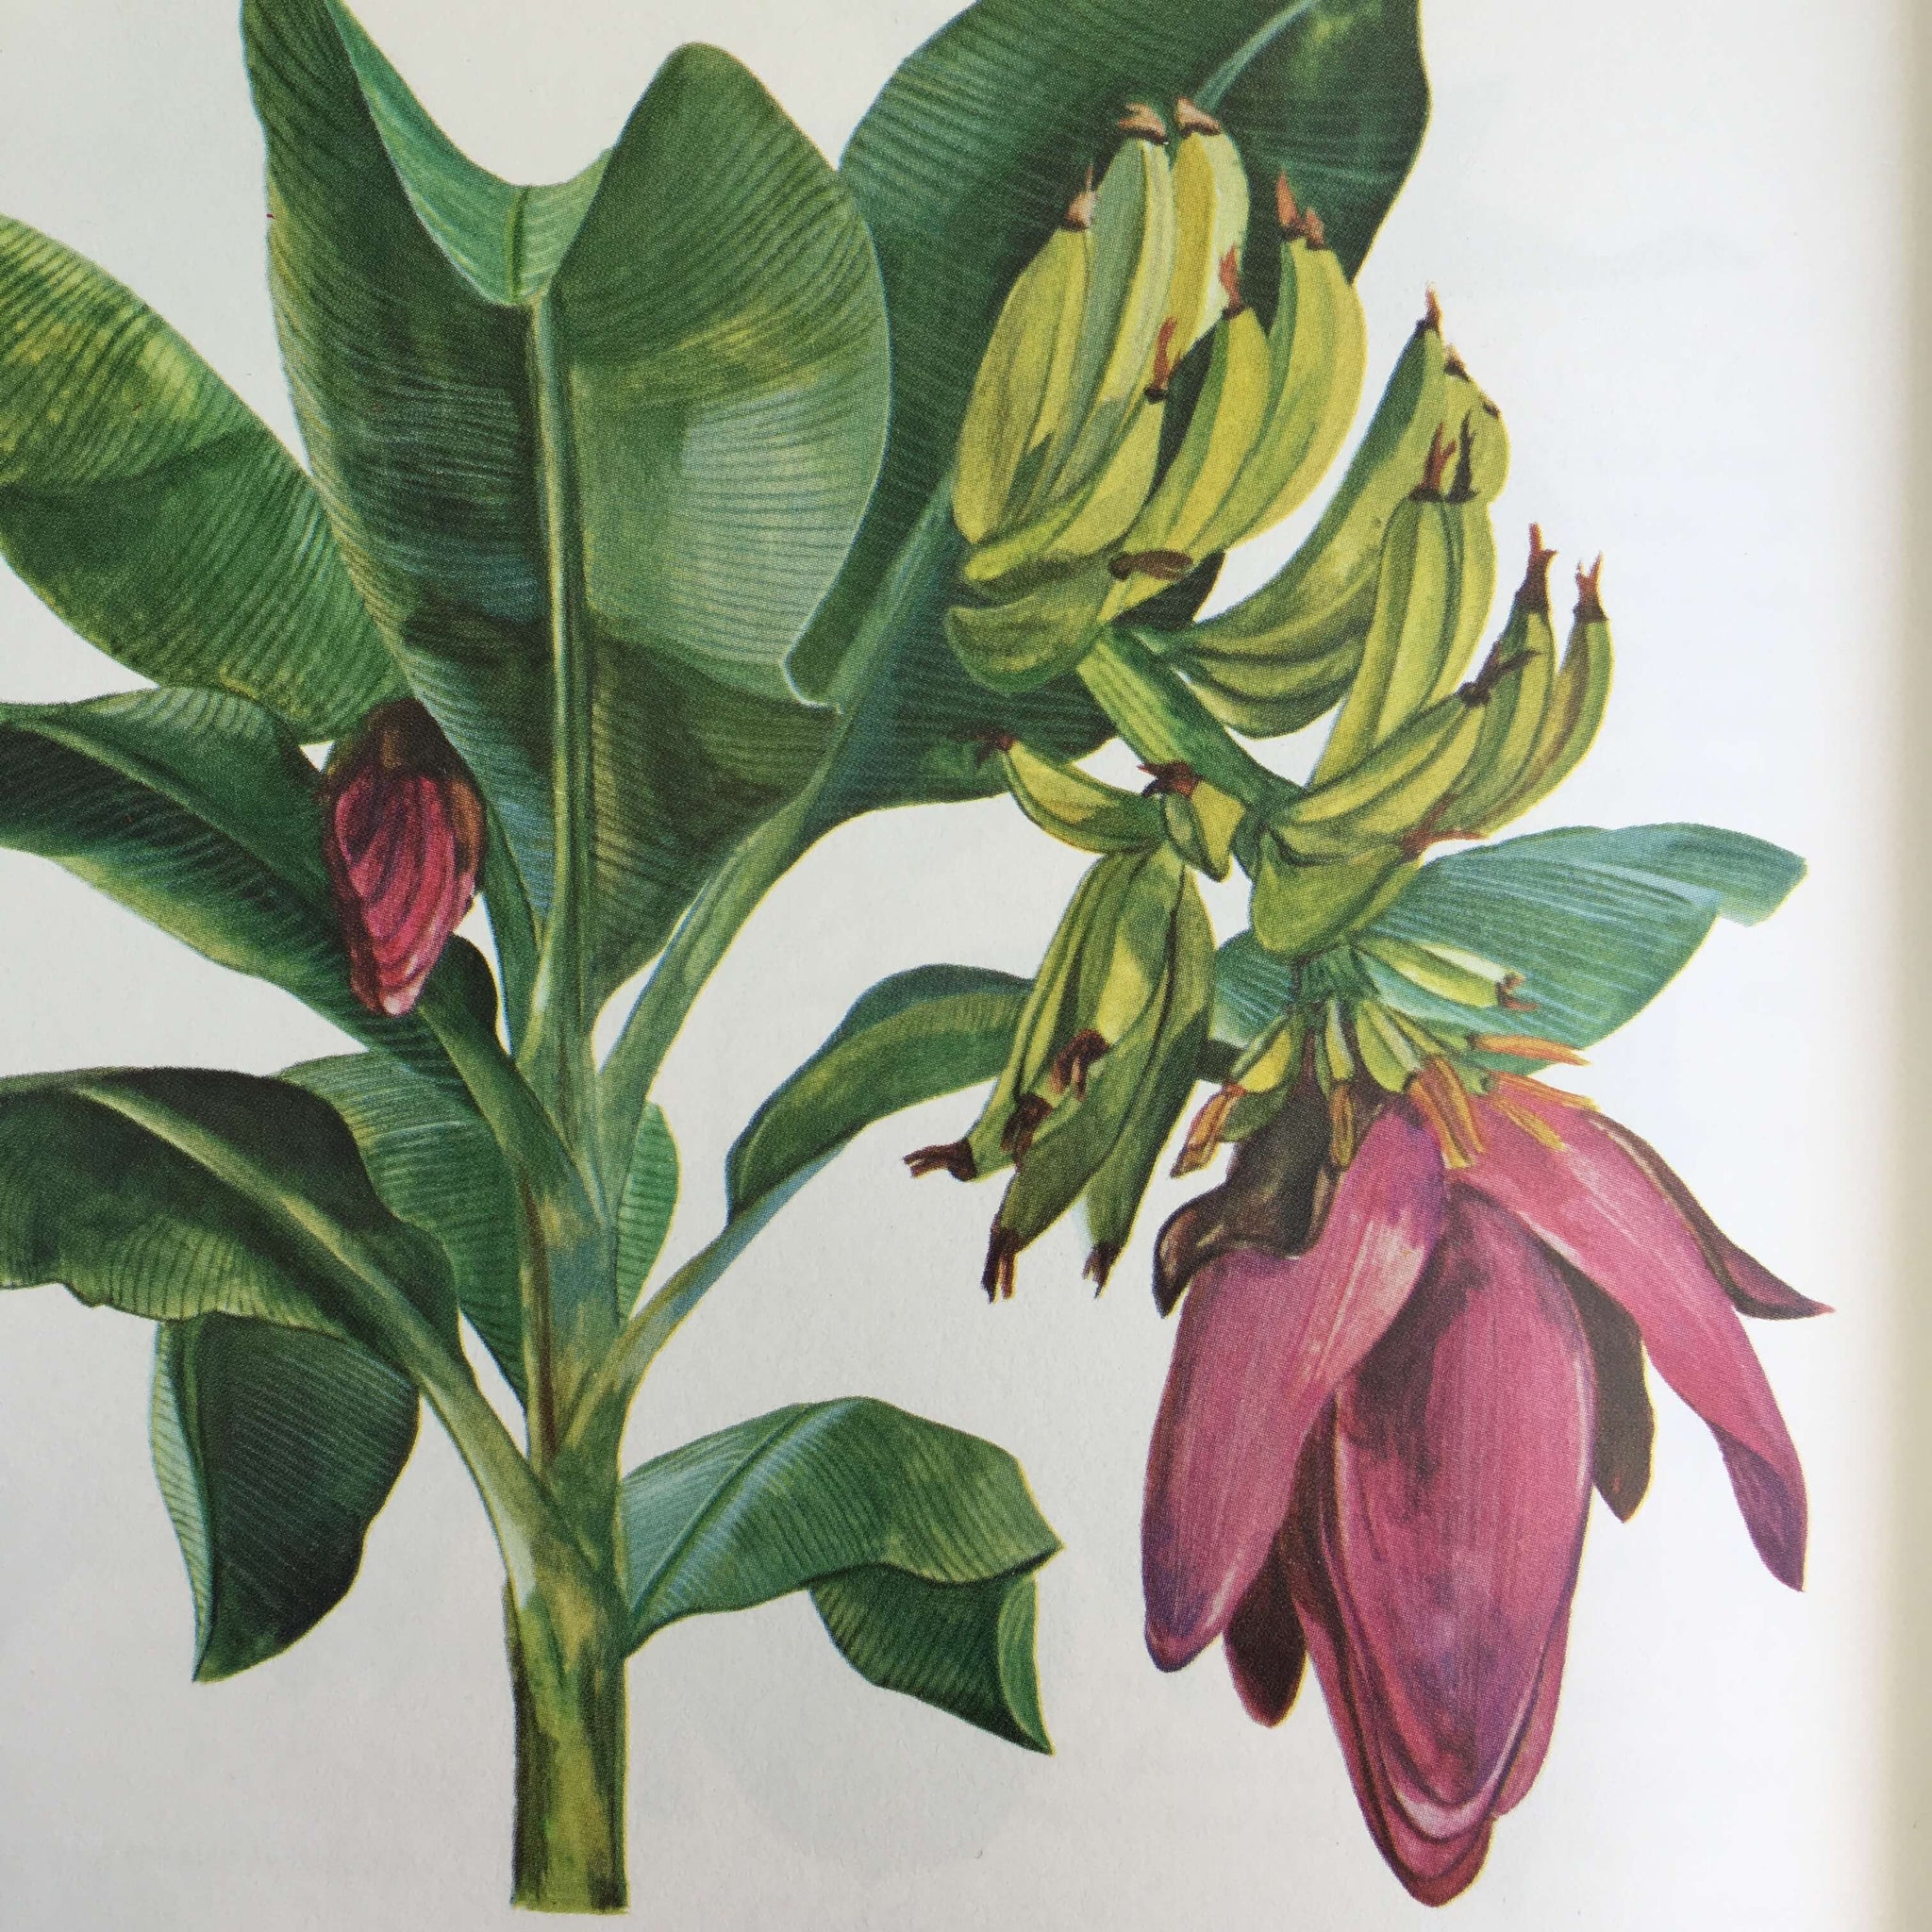 The Total Book of House Plants - Russell C. Mott- 1975 Edition Illustrated by Alan Singer